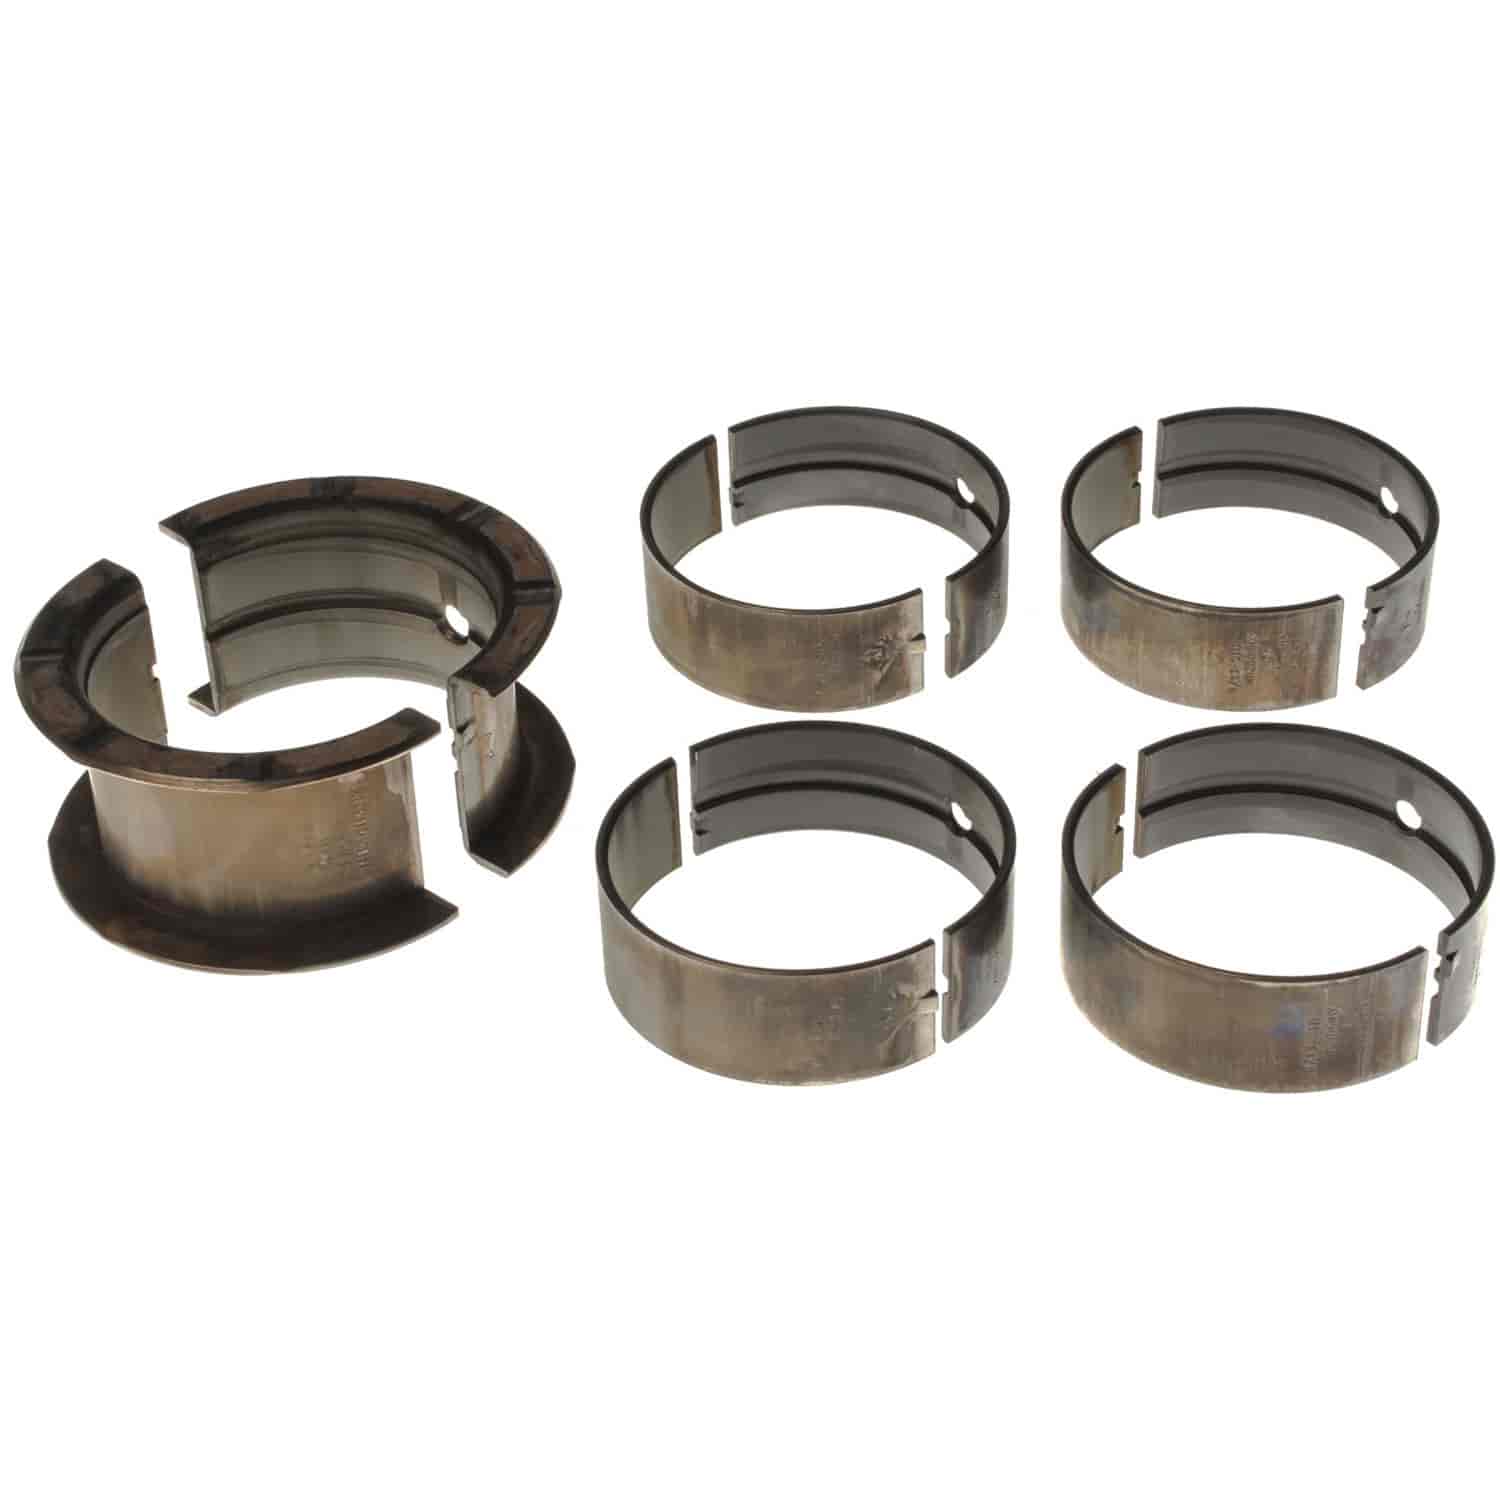 Main Bearing Set Chevy 1965-2000 V8 366/396/402/427/454/502 with Standard Size